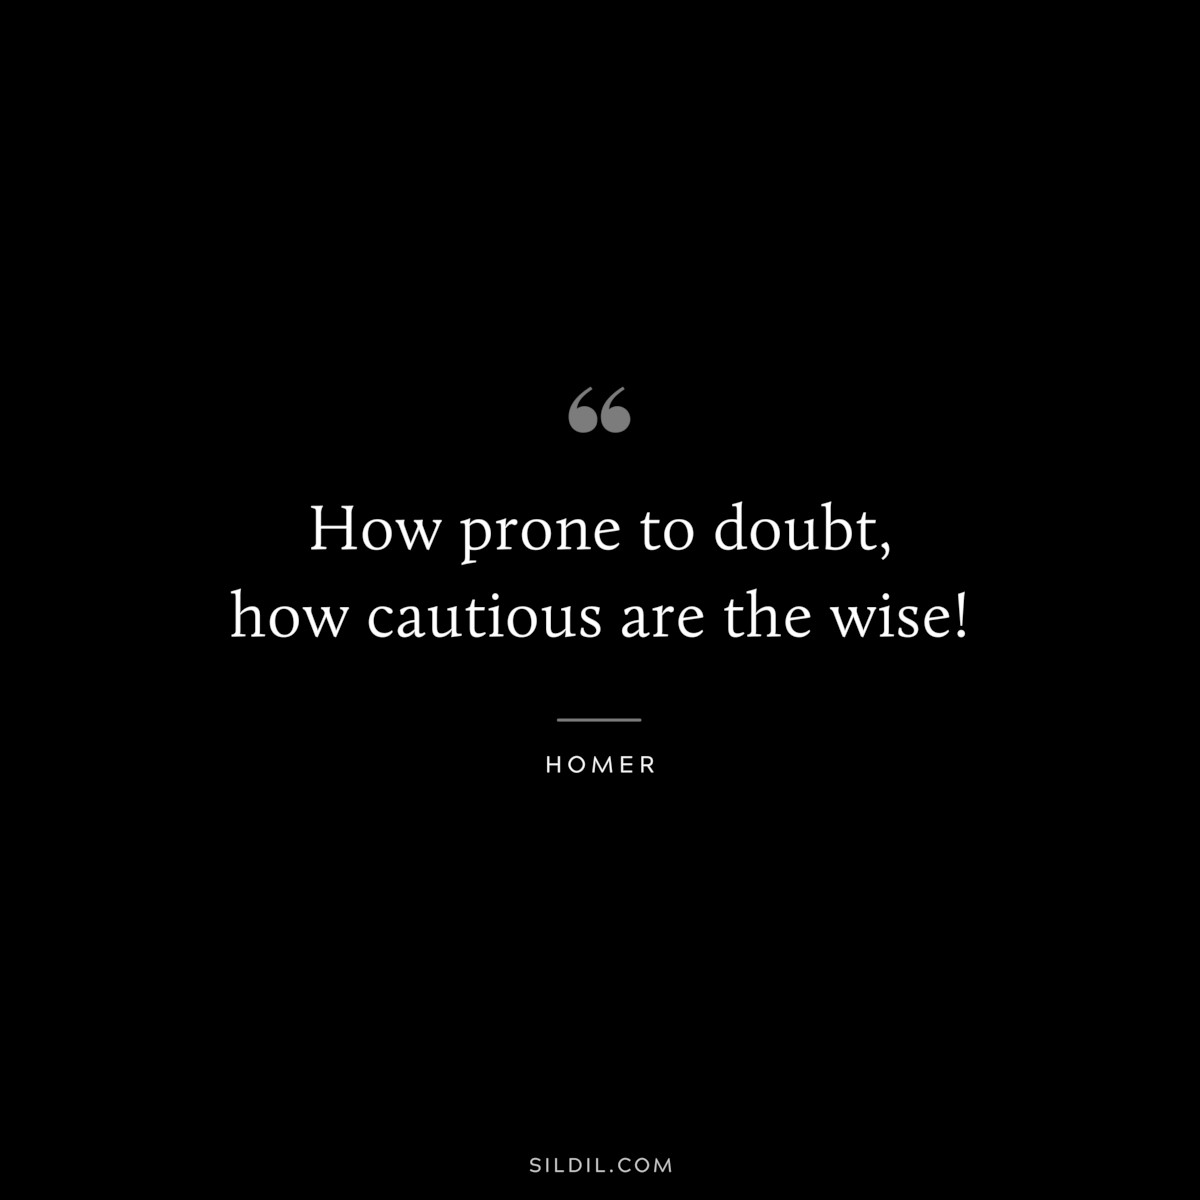 How prone to doubt, how cautious are the wise! ― Homer